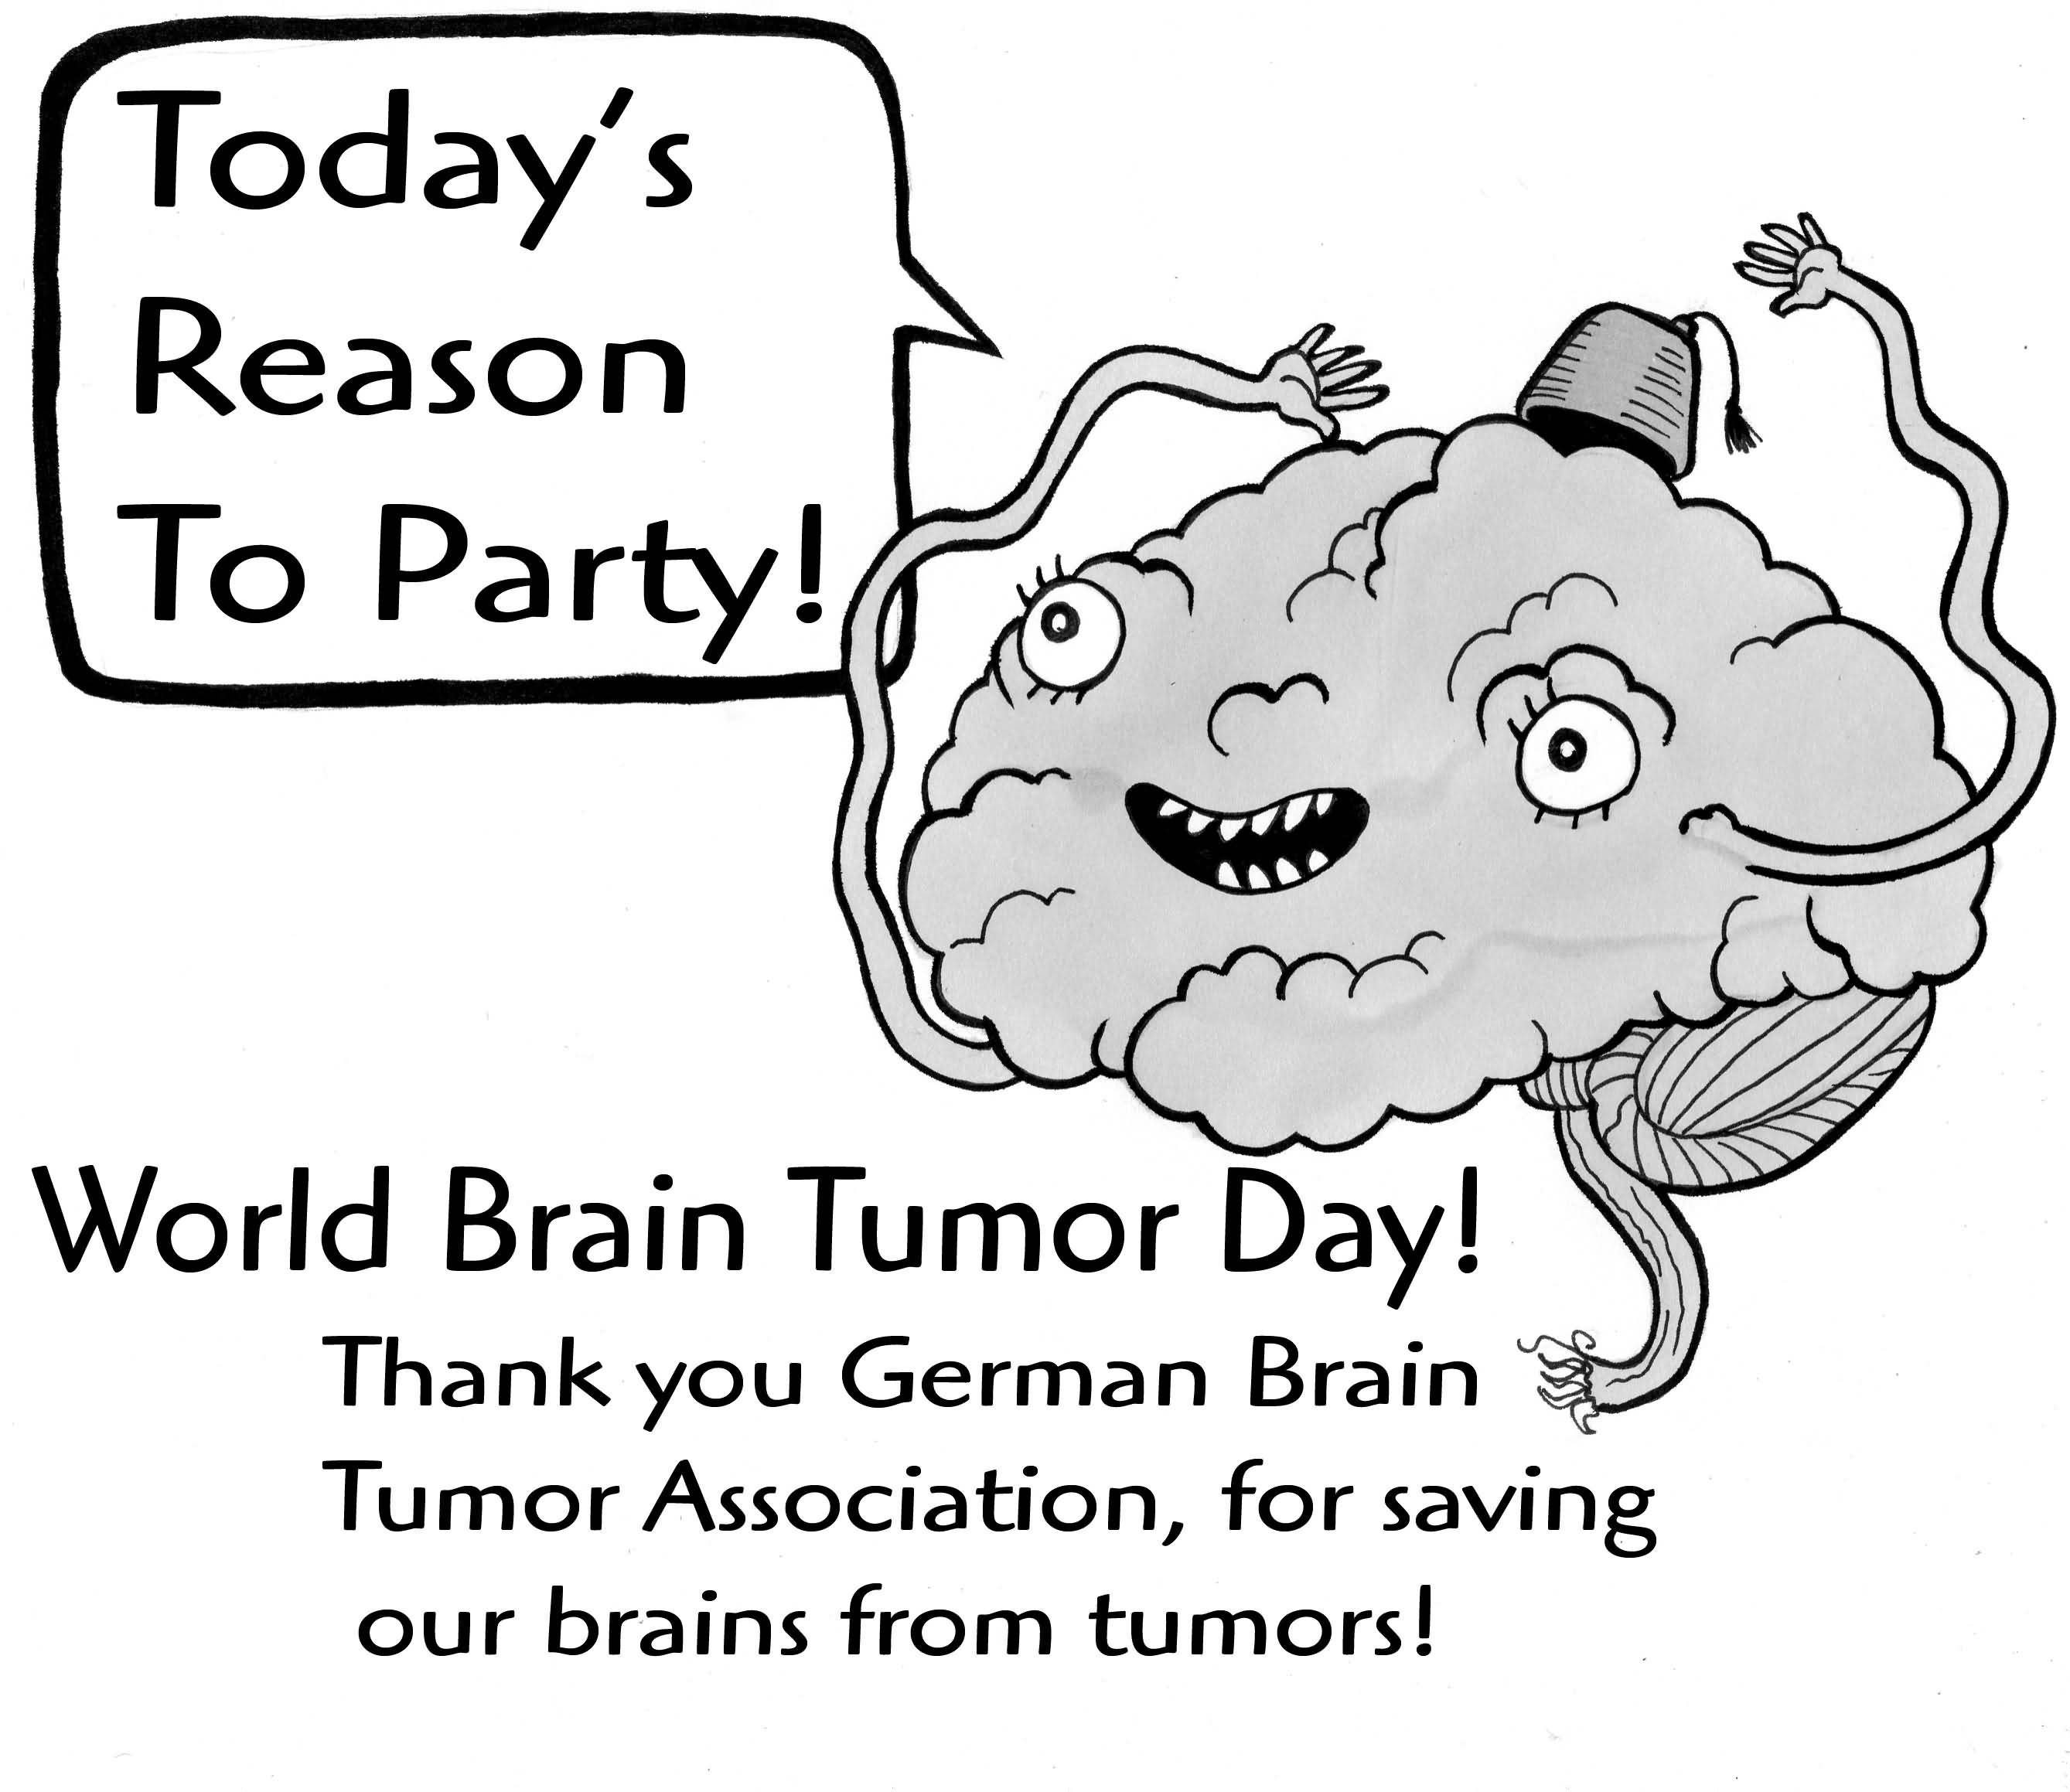 Today's Reason To Party - World Brain Tumor Day